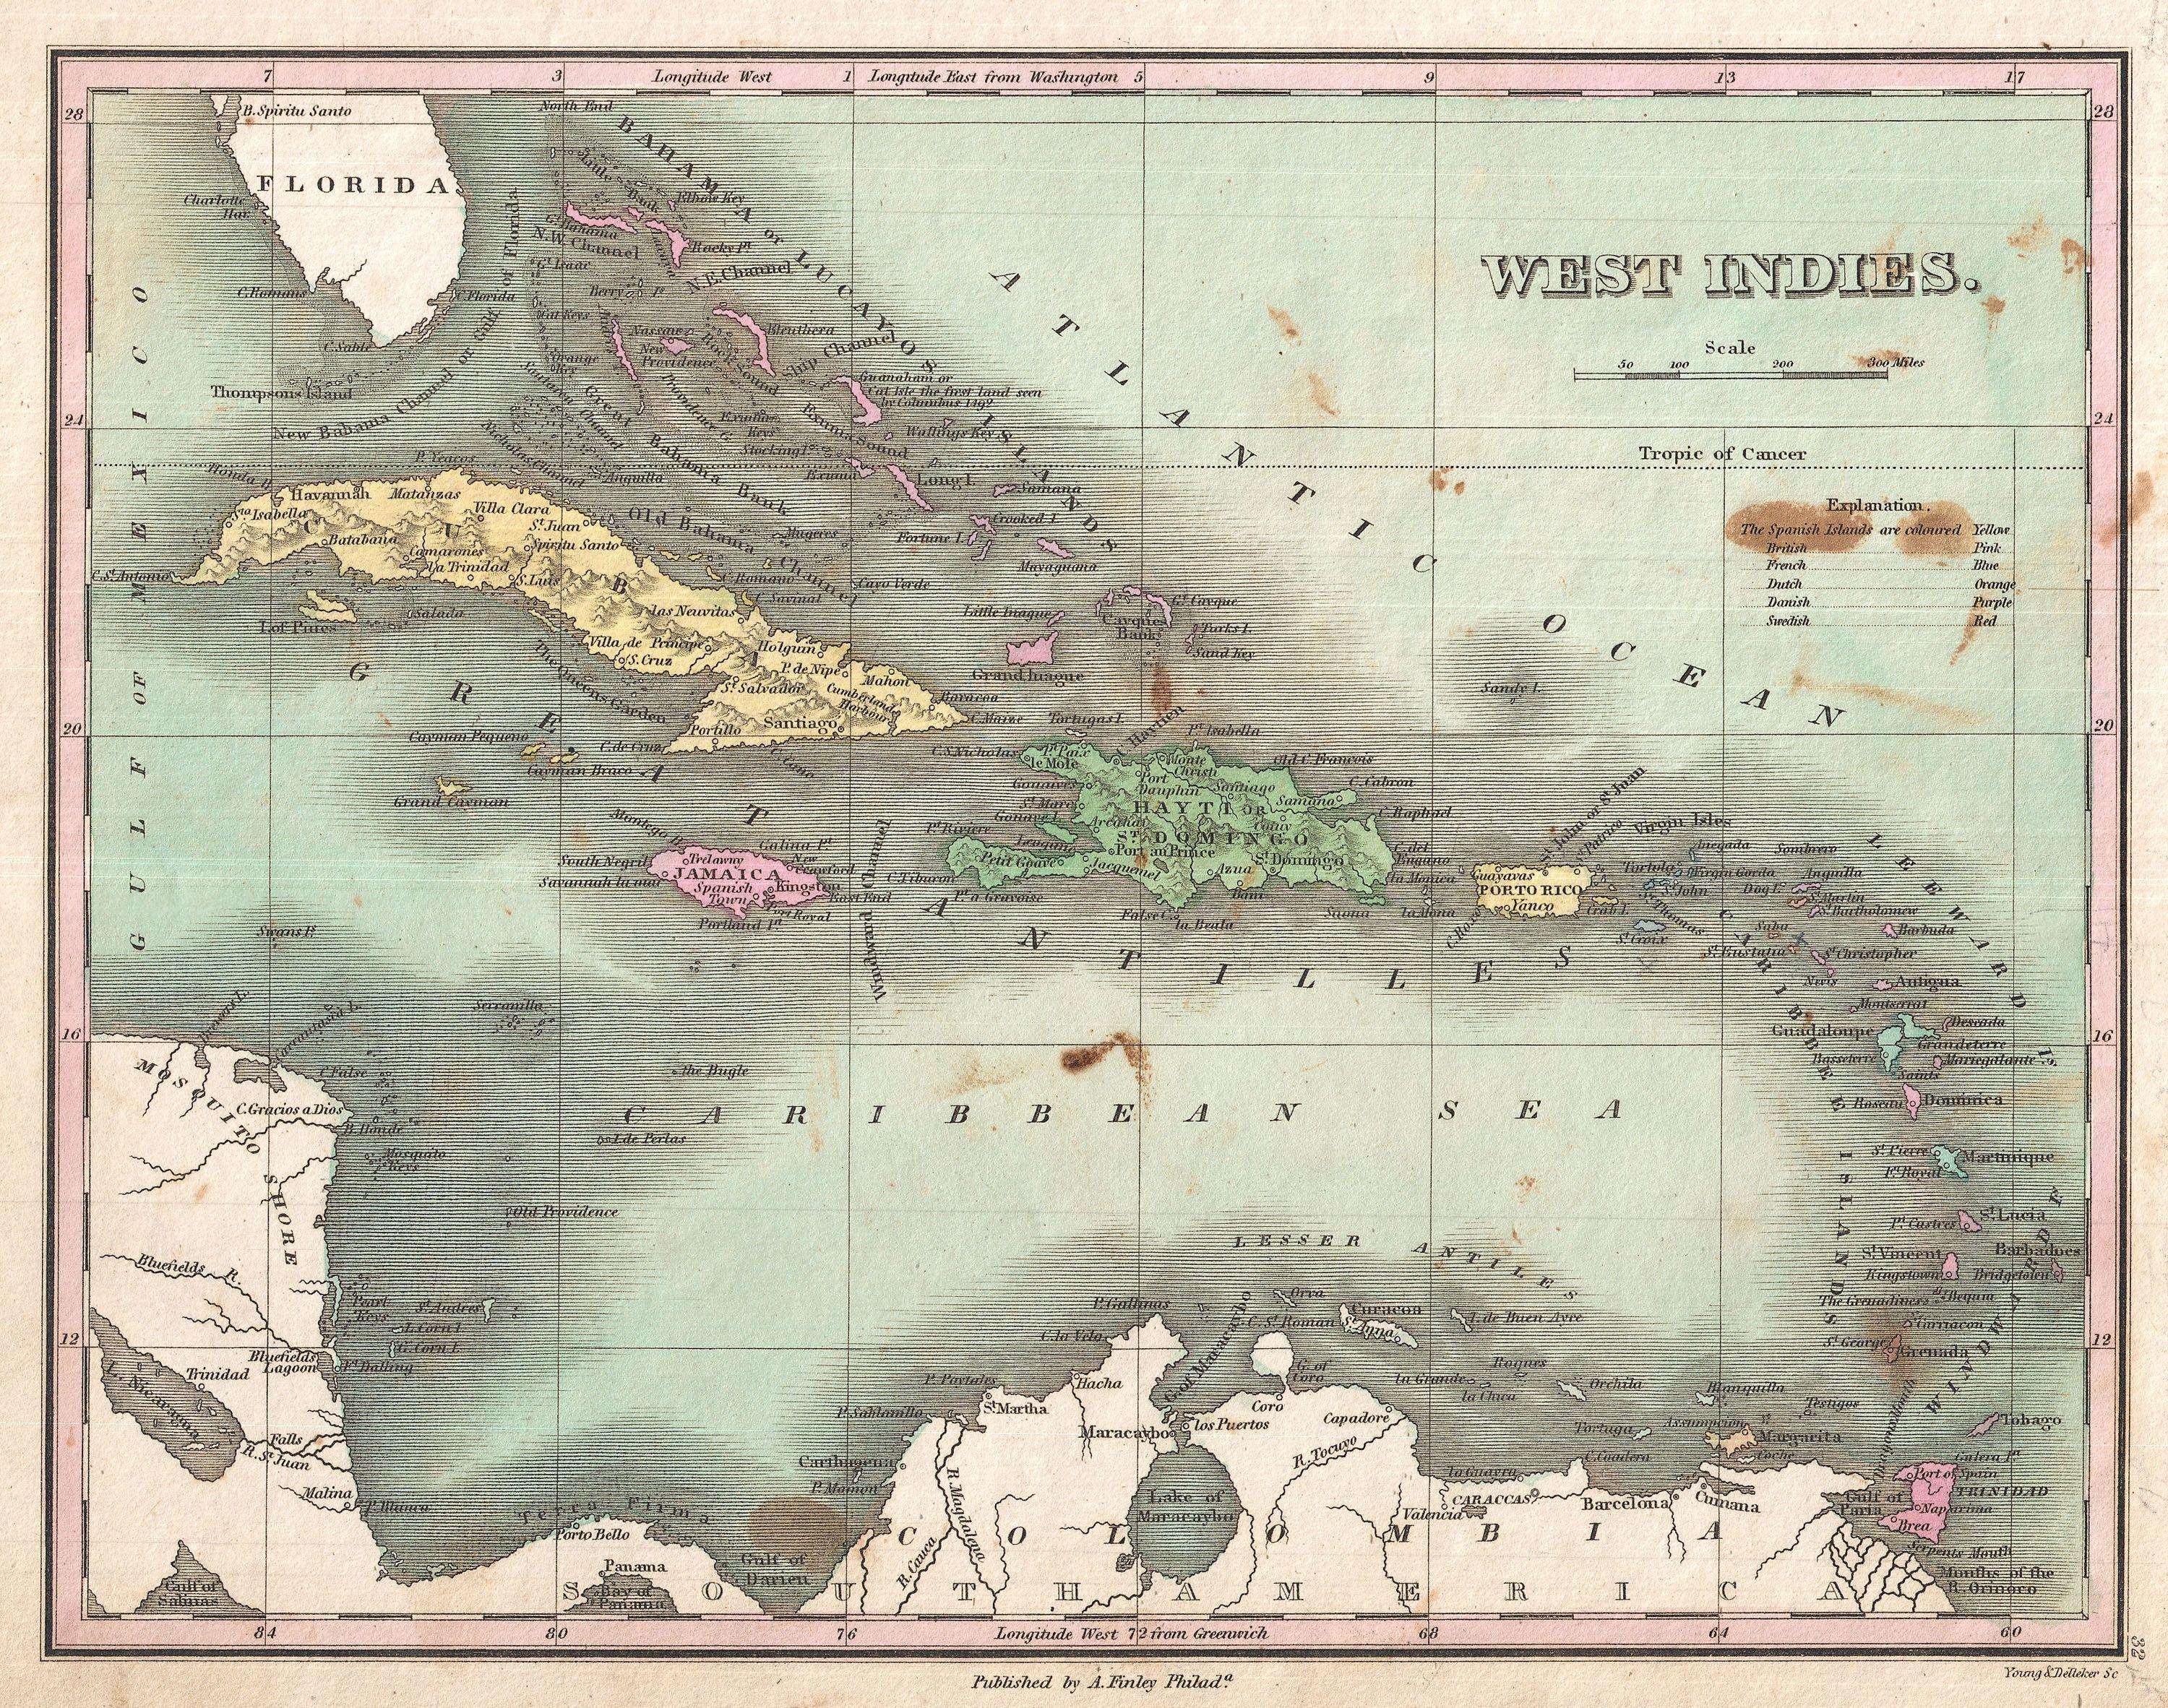 1827 Finley Map of the West Indies, Caribbean, and Antilles - Geographicus - WestIndies-finley-1827